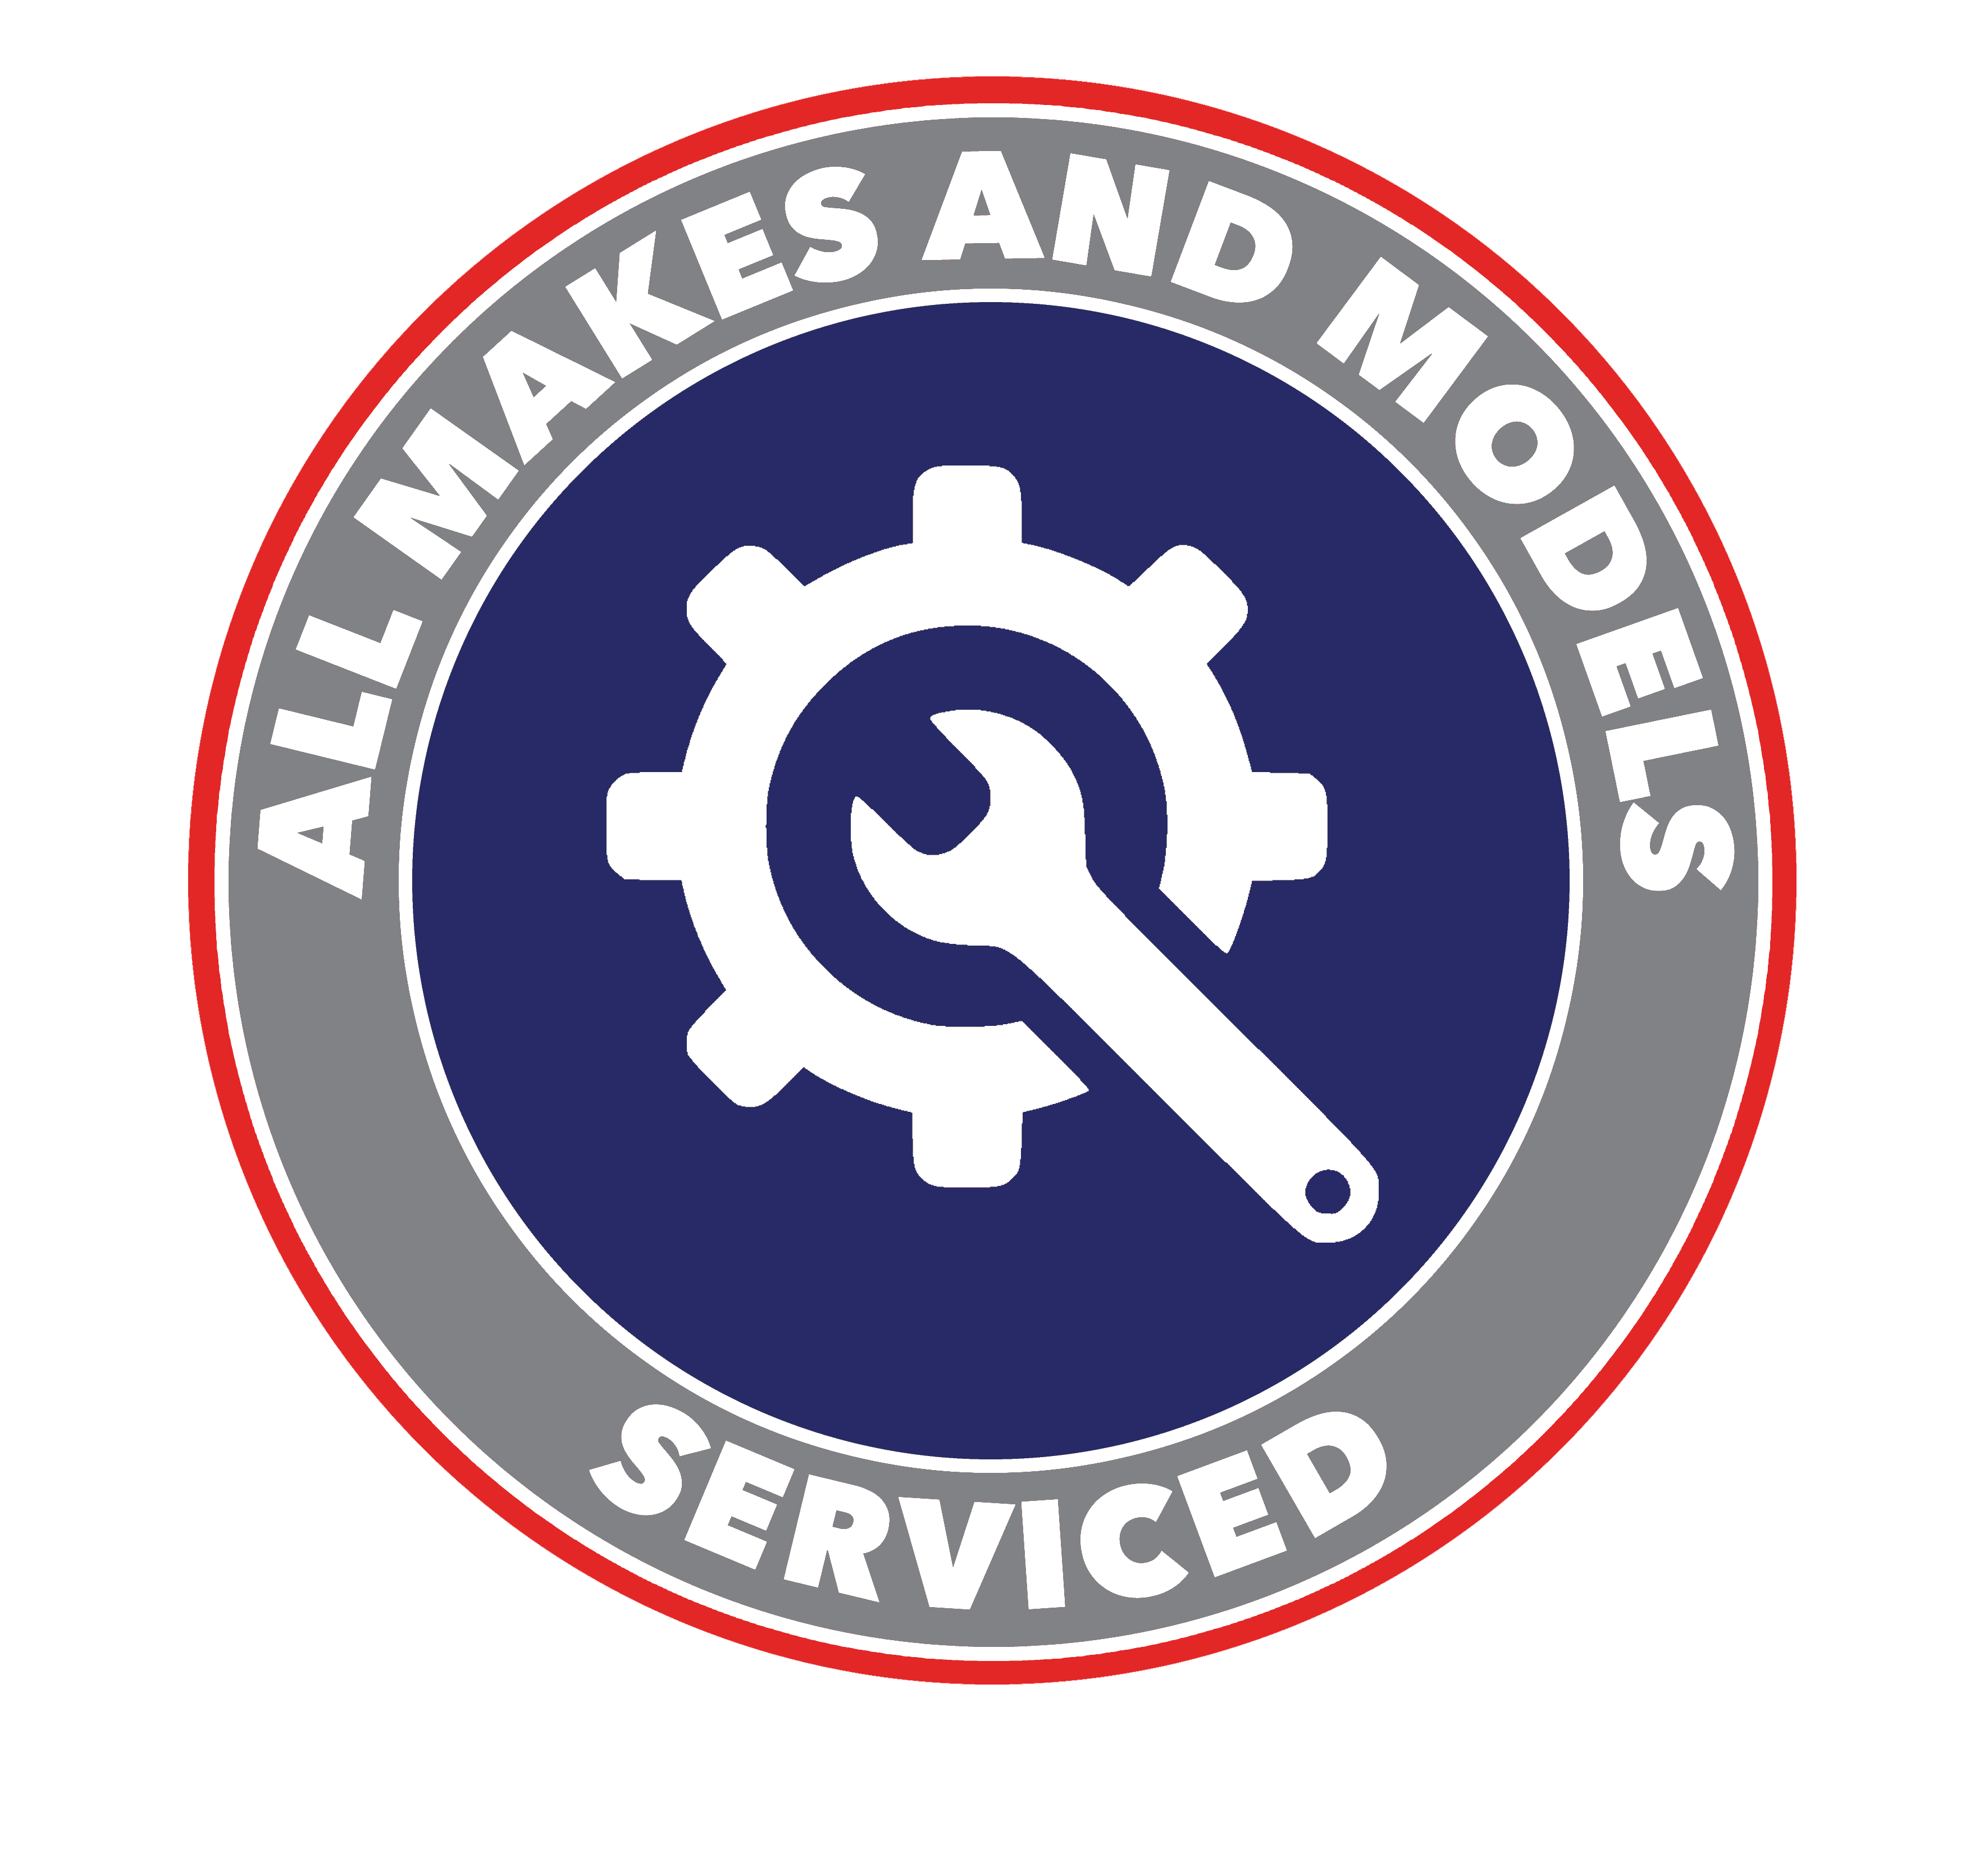 All Makes And Models Serviced